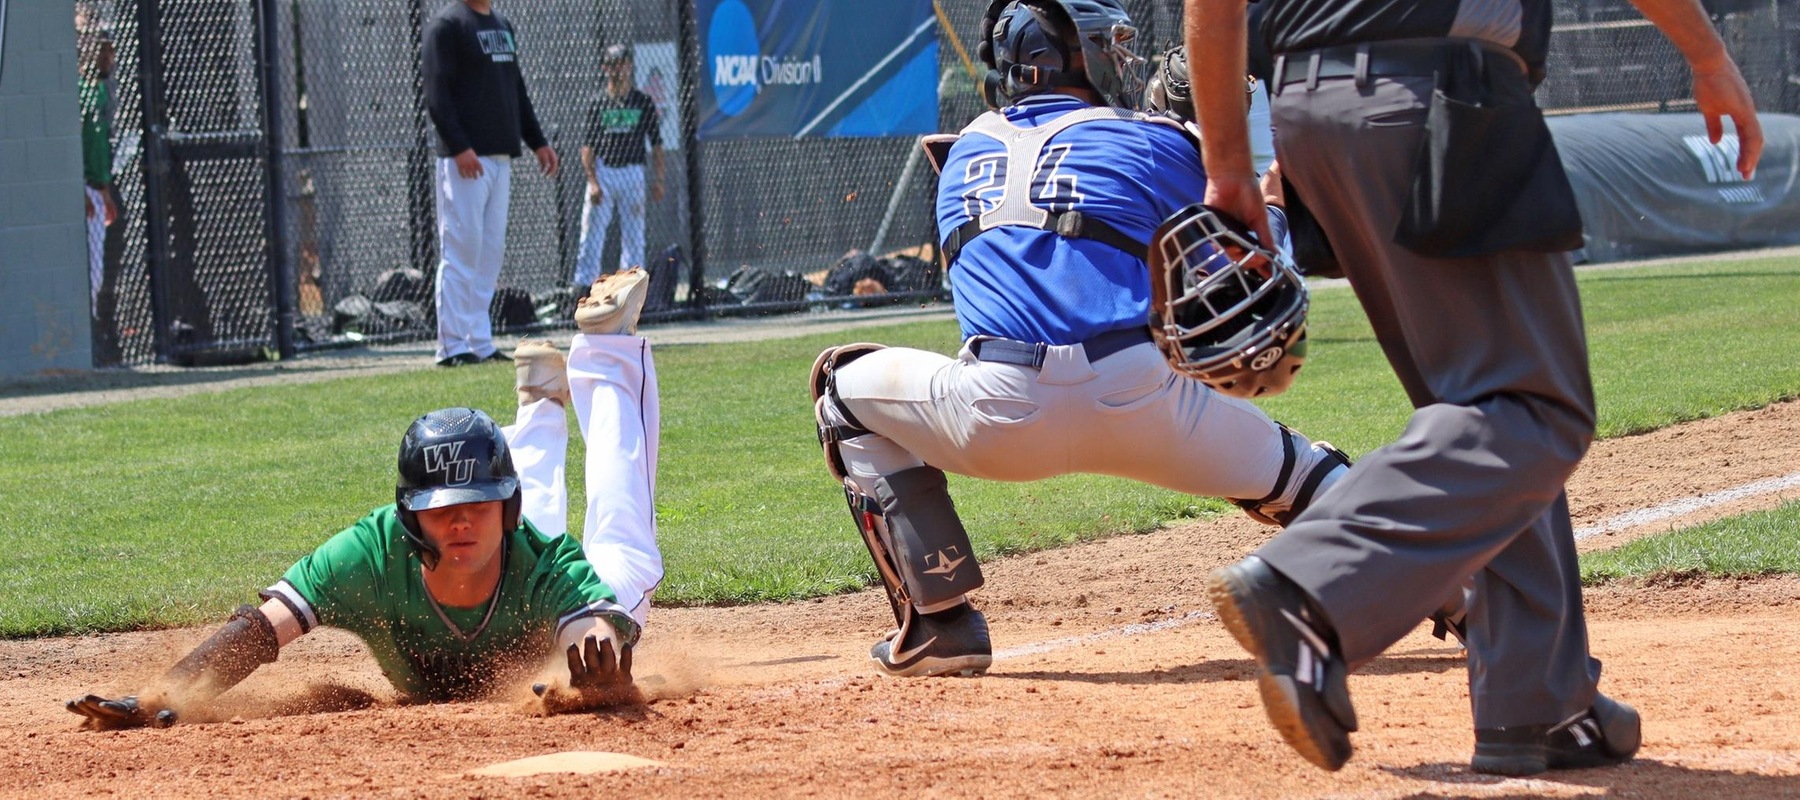 Photo of Shawn Edevane scoring a run against Southern Connecticut State on Thursday in the Regionals. Copyright 2022; Wilmington University. All rights reserved. Photo by Trudy Spence. May 19, 2022.